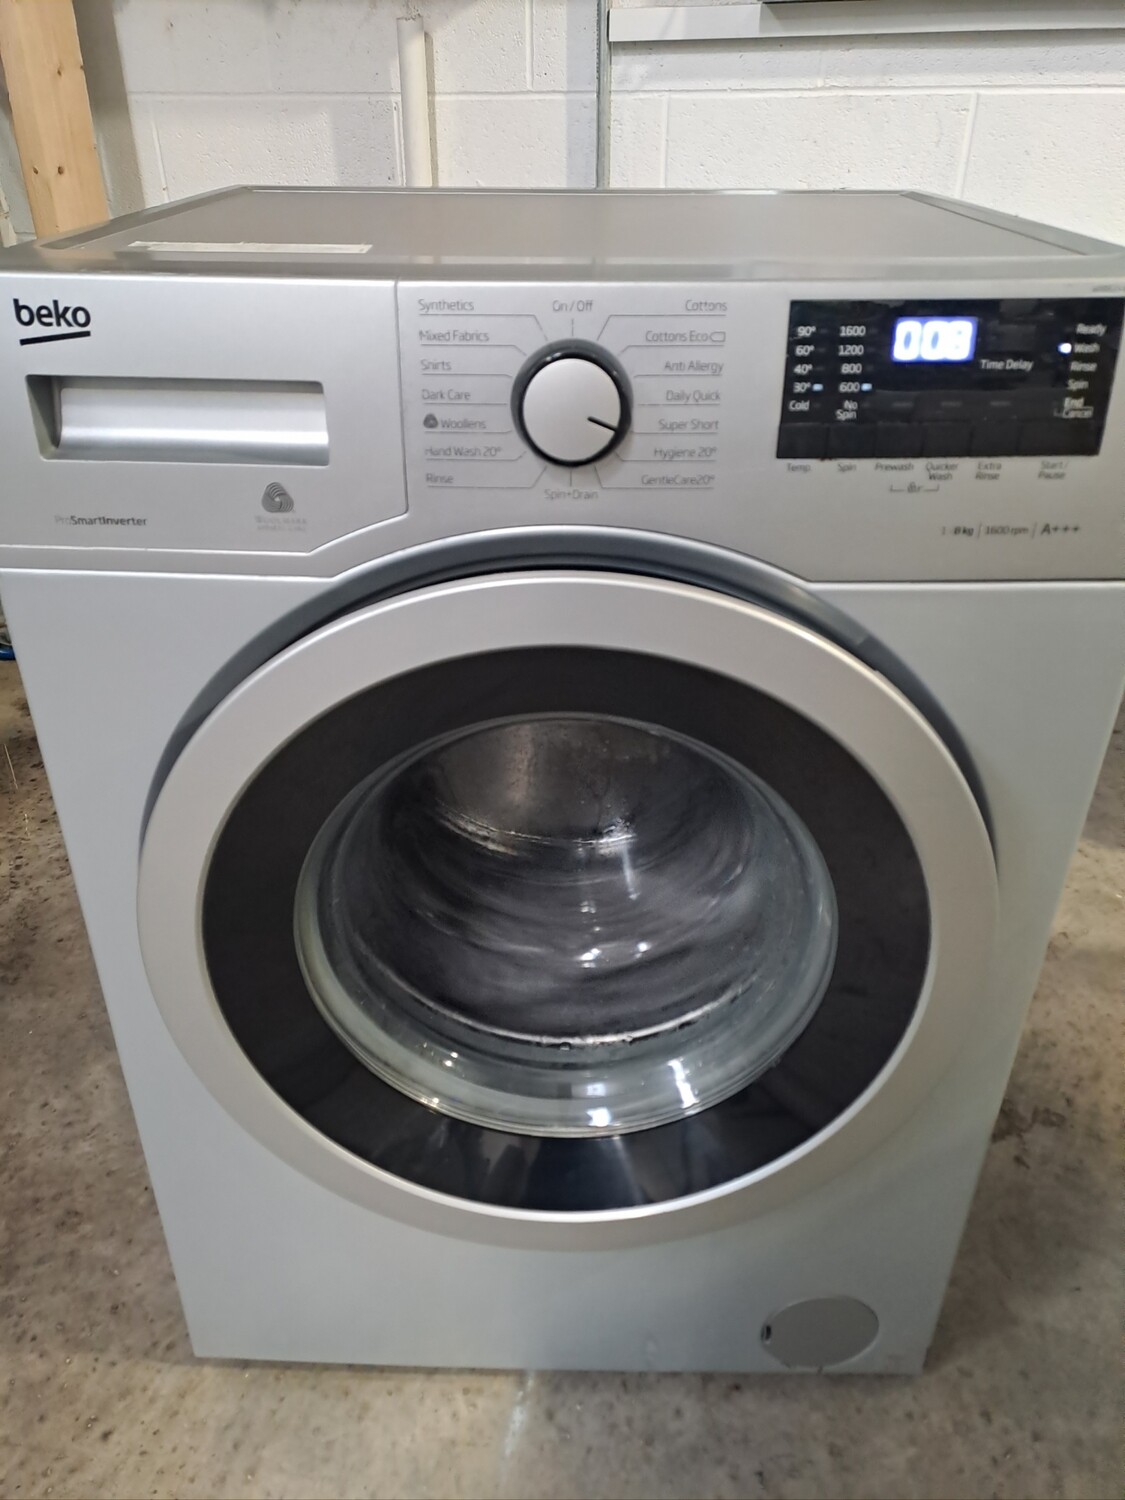 Beko WR862441S 8kg Load 1600 Spin Washing Machine - Silver - Refurbished - 6 Month Guarantee. This item is located in our Whitby Road Shop